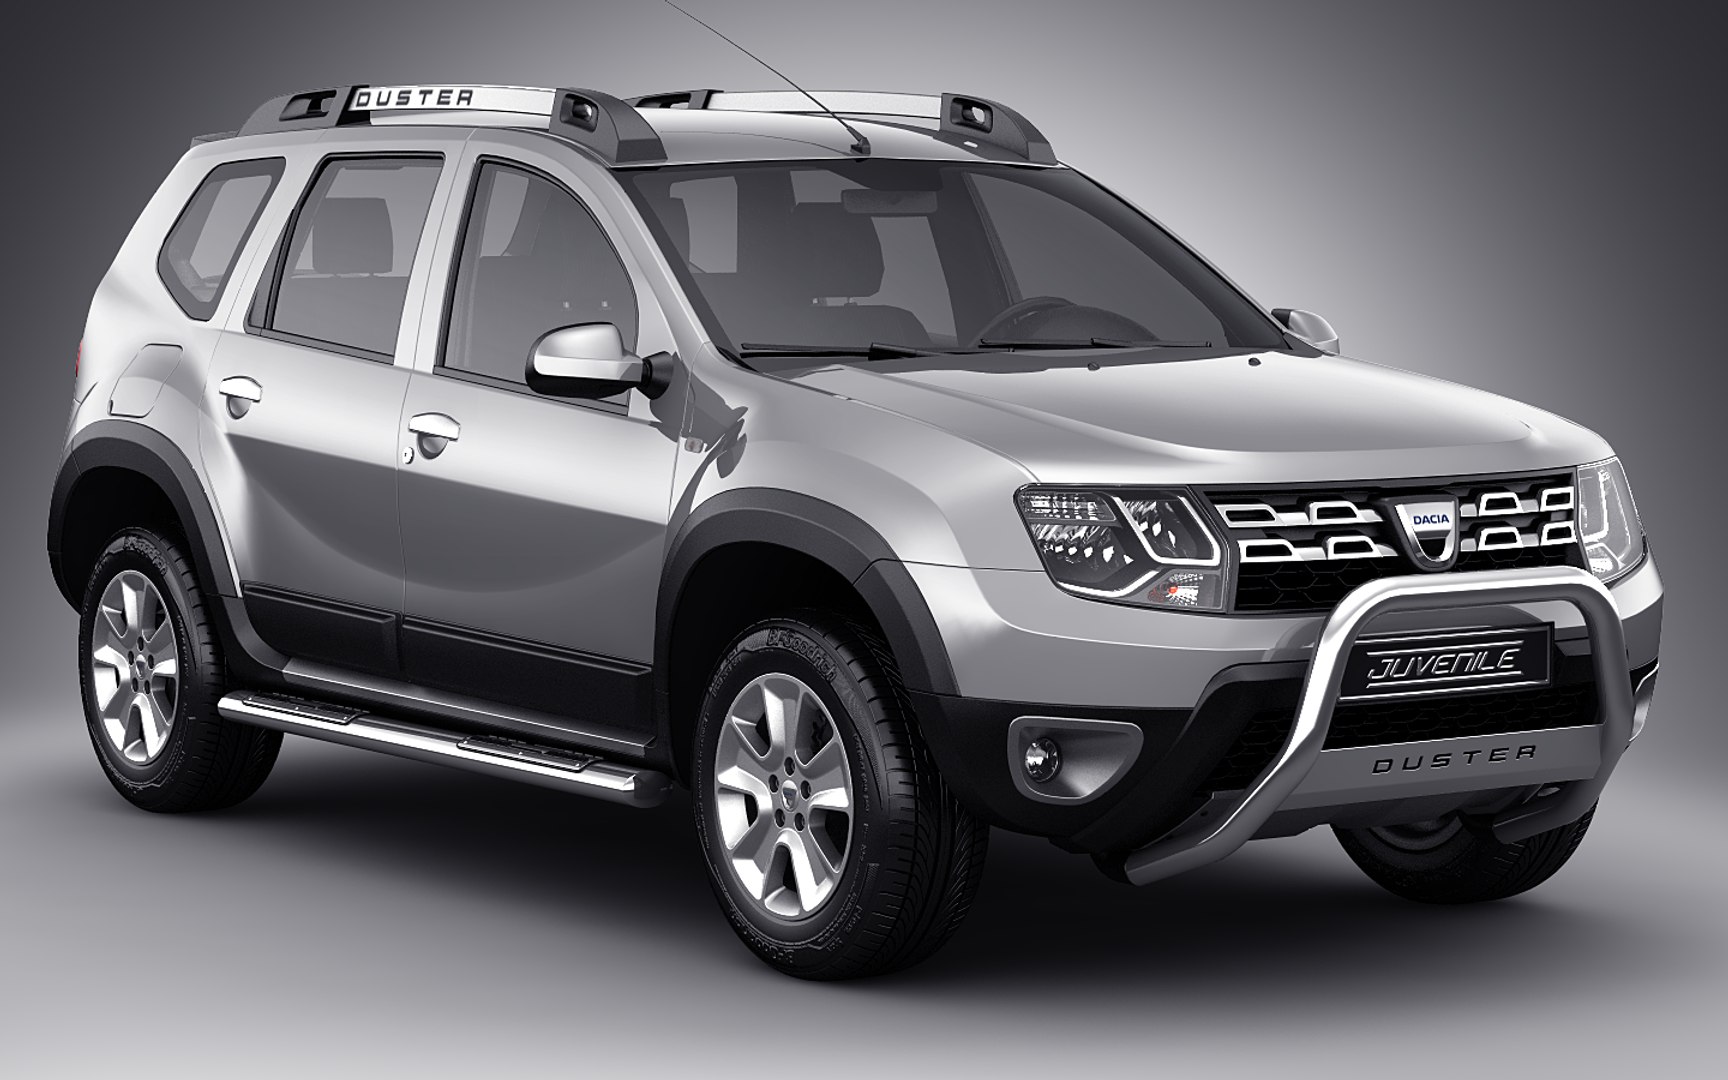 2024 Dacia Duster Pickup Truck Rendered, Base Spec and 3-Door SUV